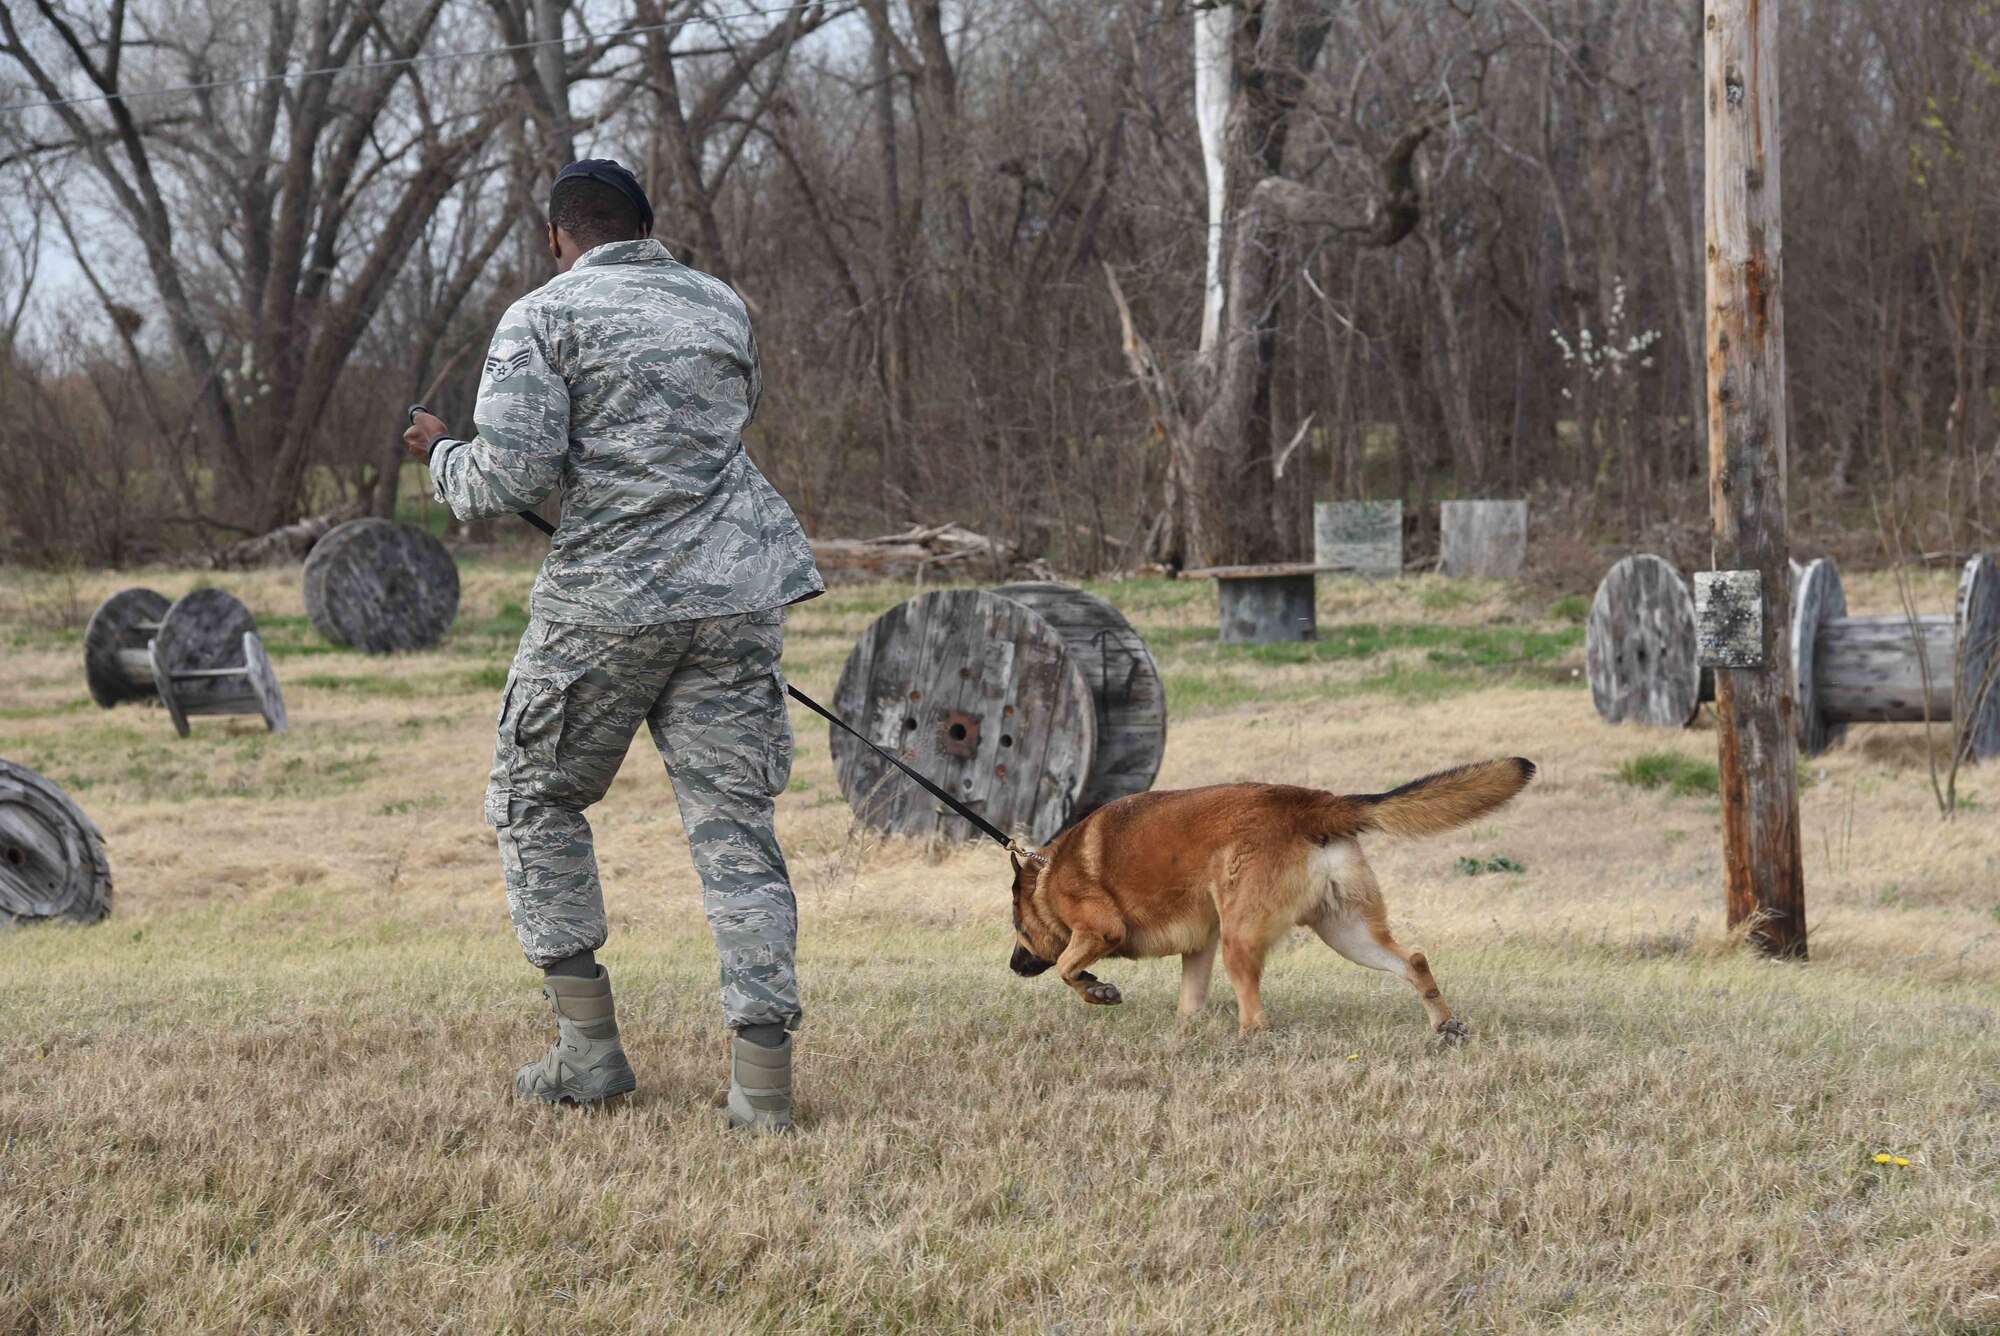 Senior Airman Brandon Proctor, 22nd Security Forces Squadron military working dog handler, and Iras, an MWD, perform scout training March 23, 2017, at McConnell Air Force Base, Kan. This type of training prepares the dogs to be able to locate a suspect who flees into a wooded area. (U.S. Air Force photo/Airman 1st Class Erin McClellan)